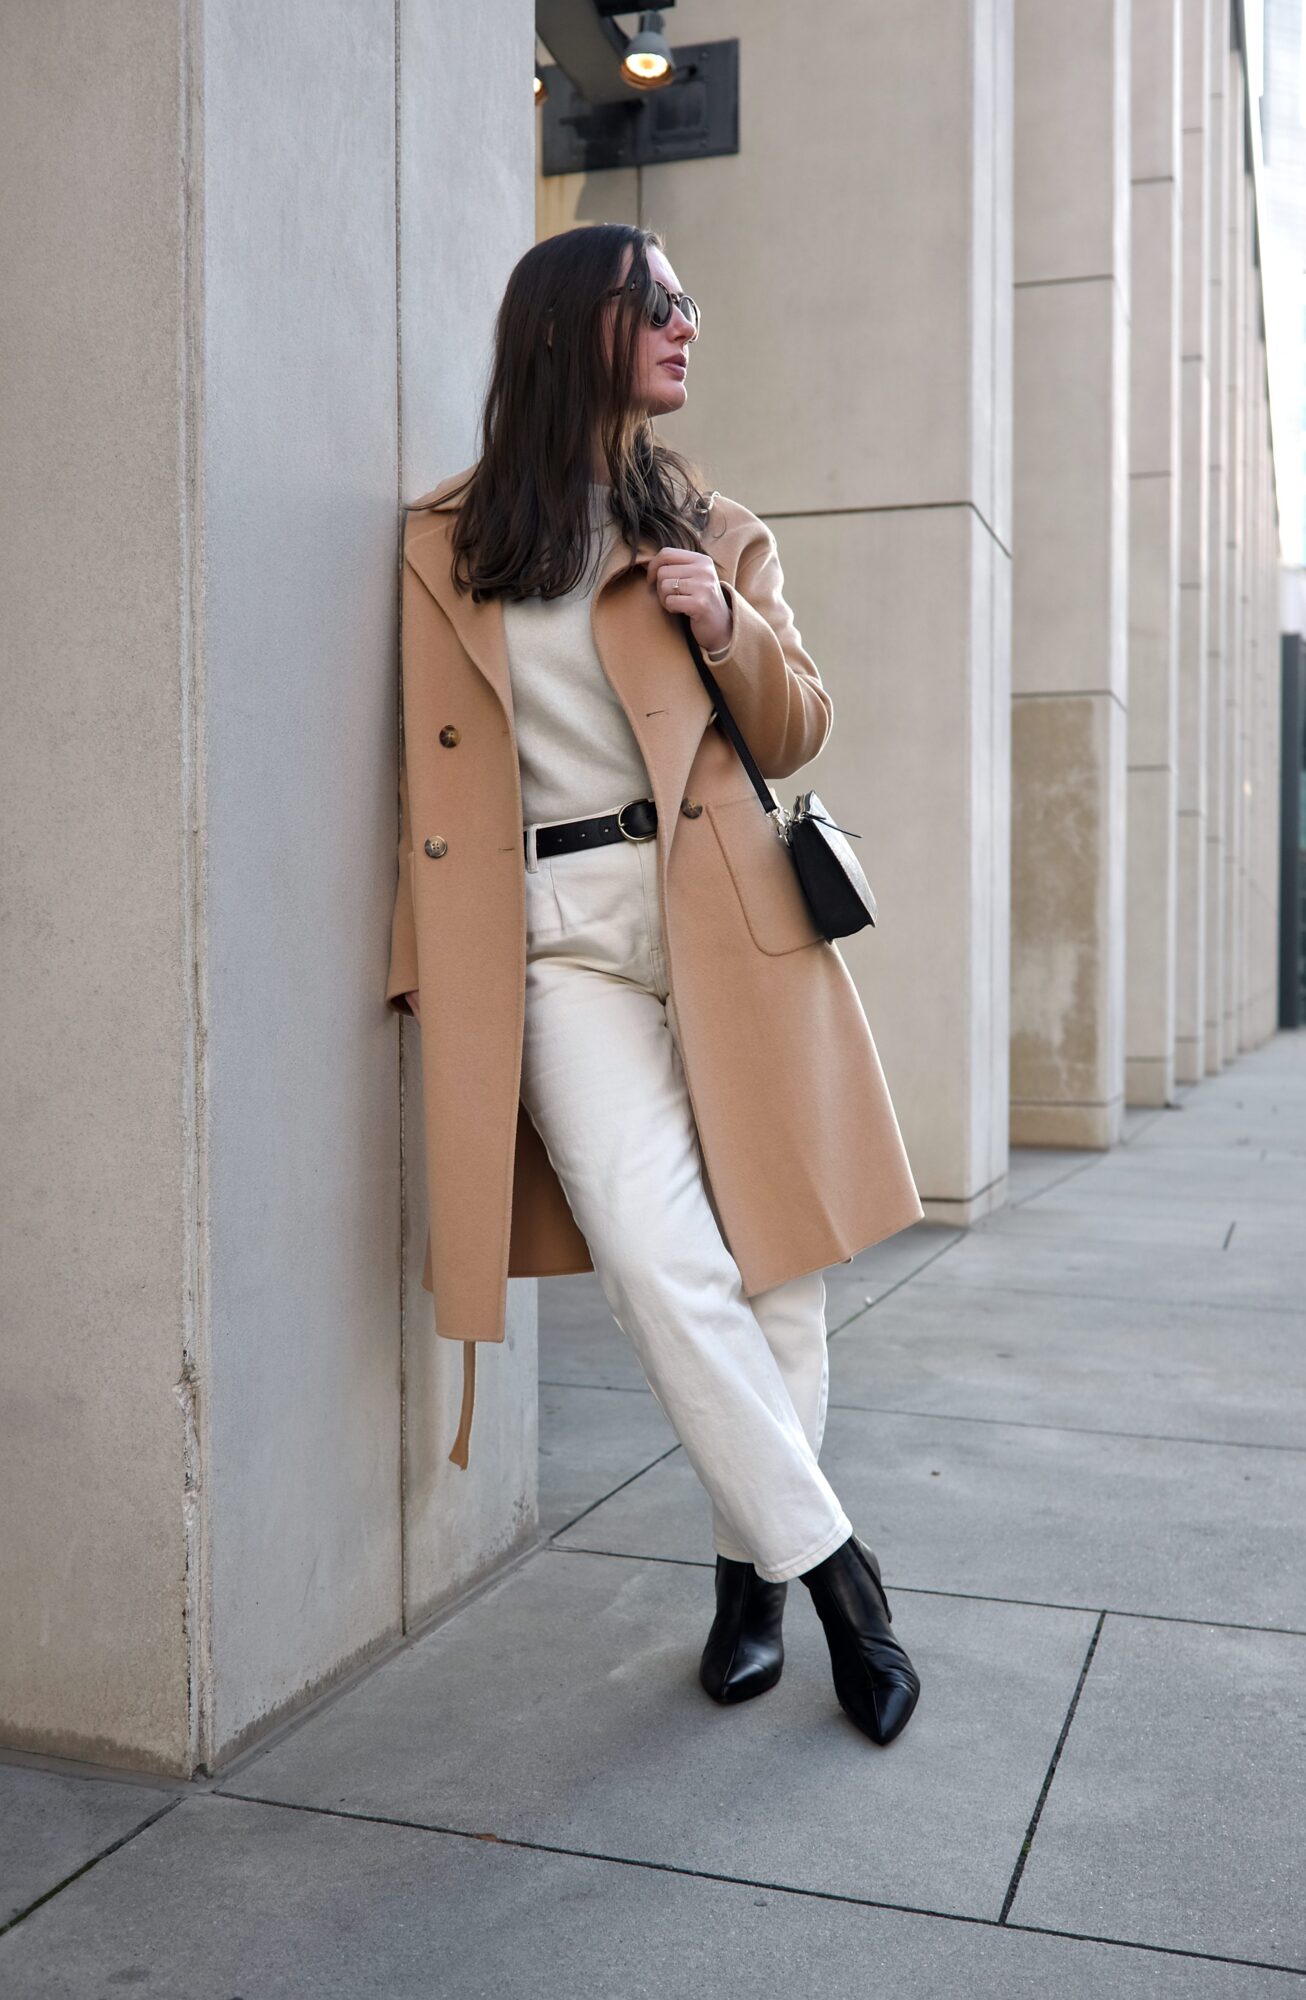 Alyssa wears a white top, white jeans, black boots, and camel coat and leans on a column